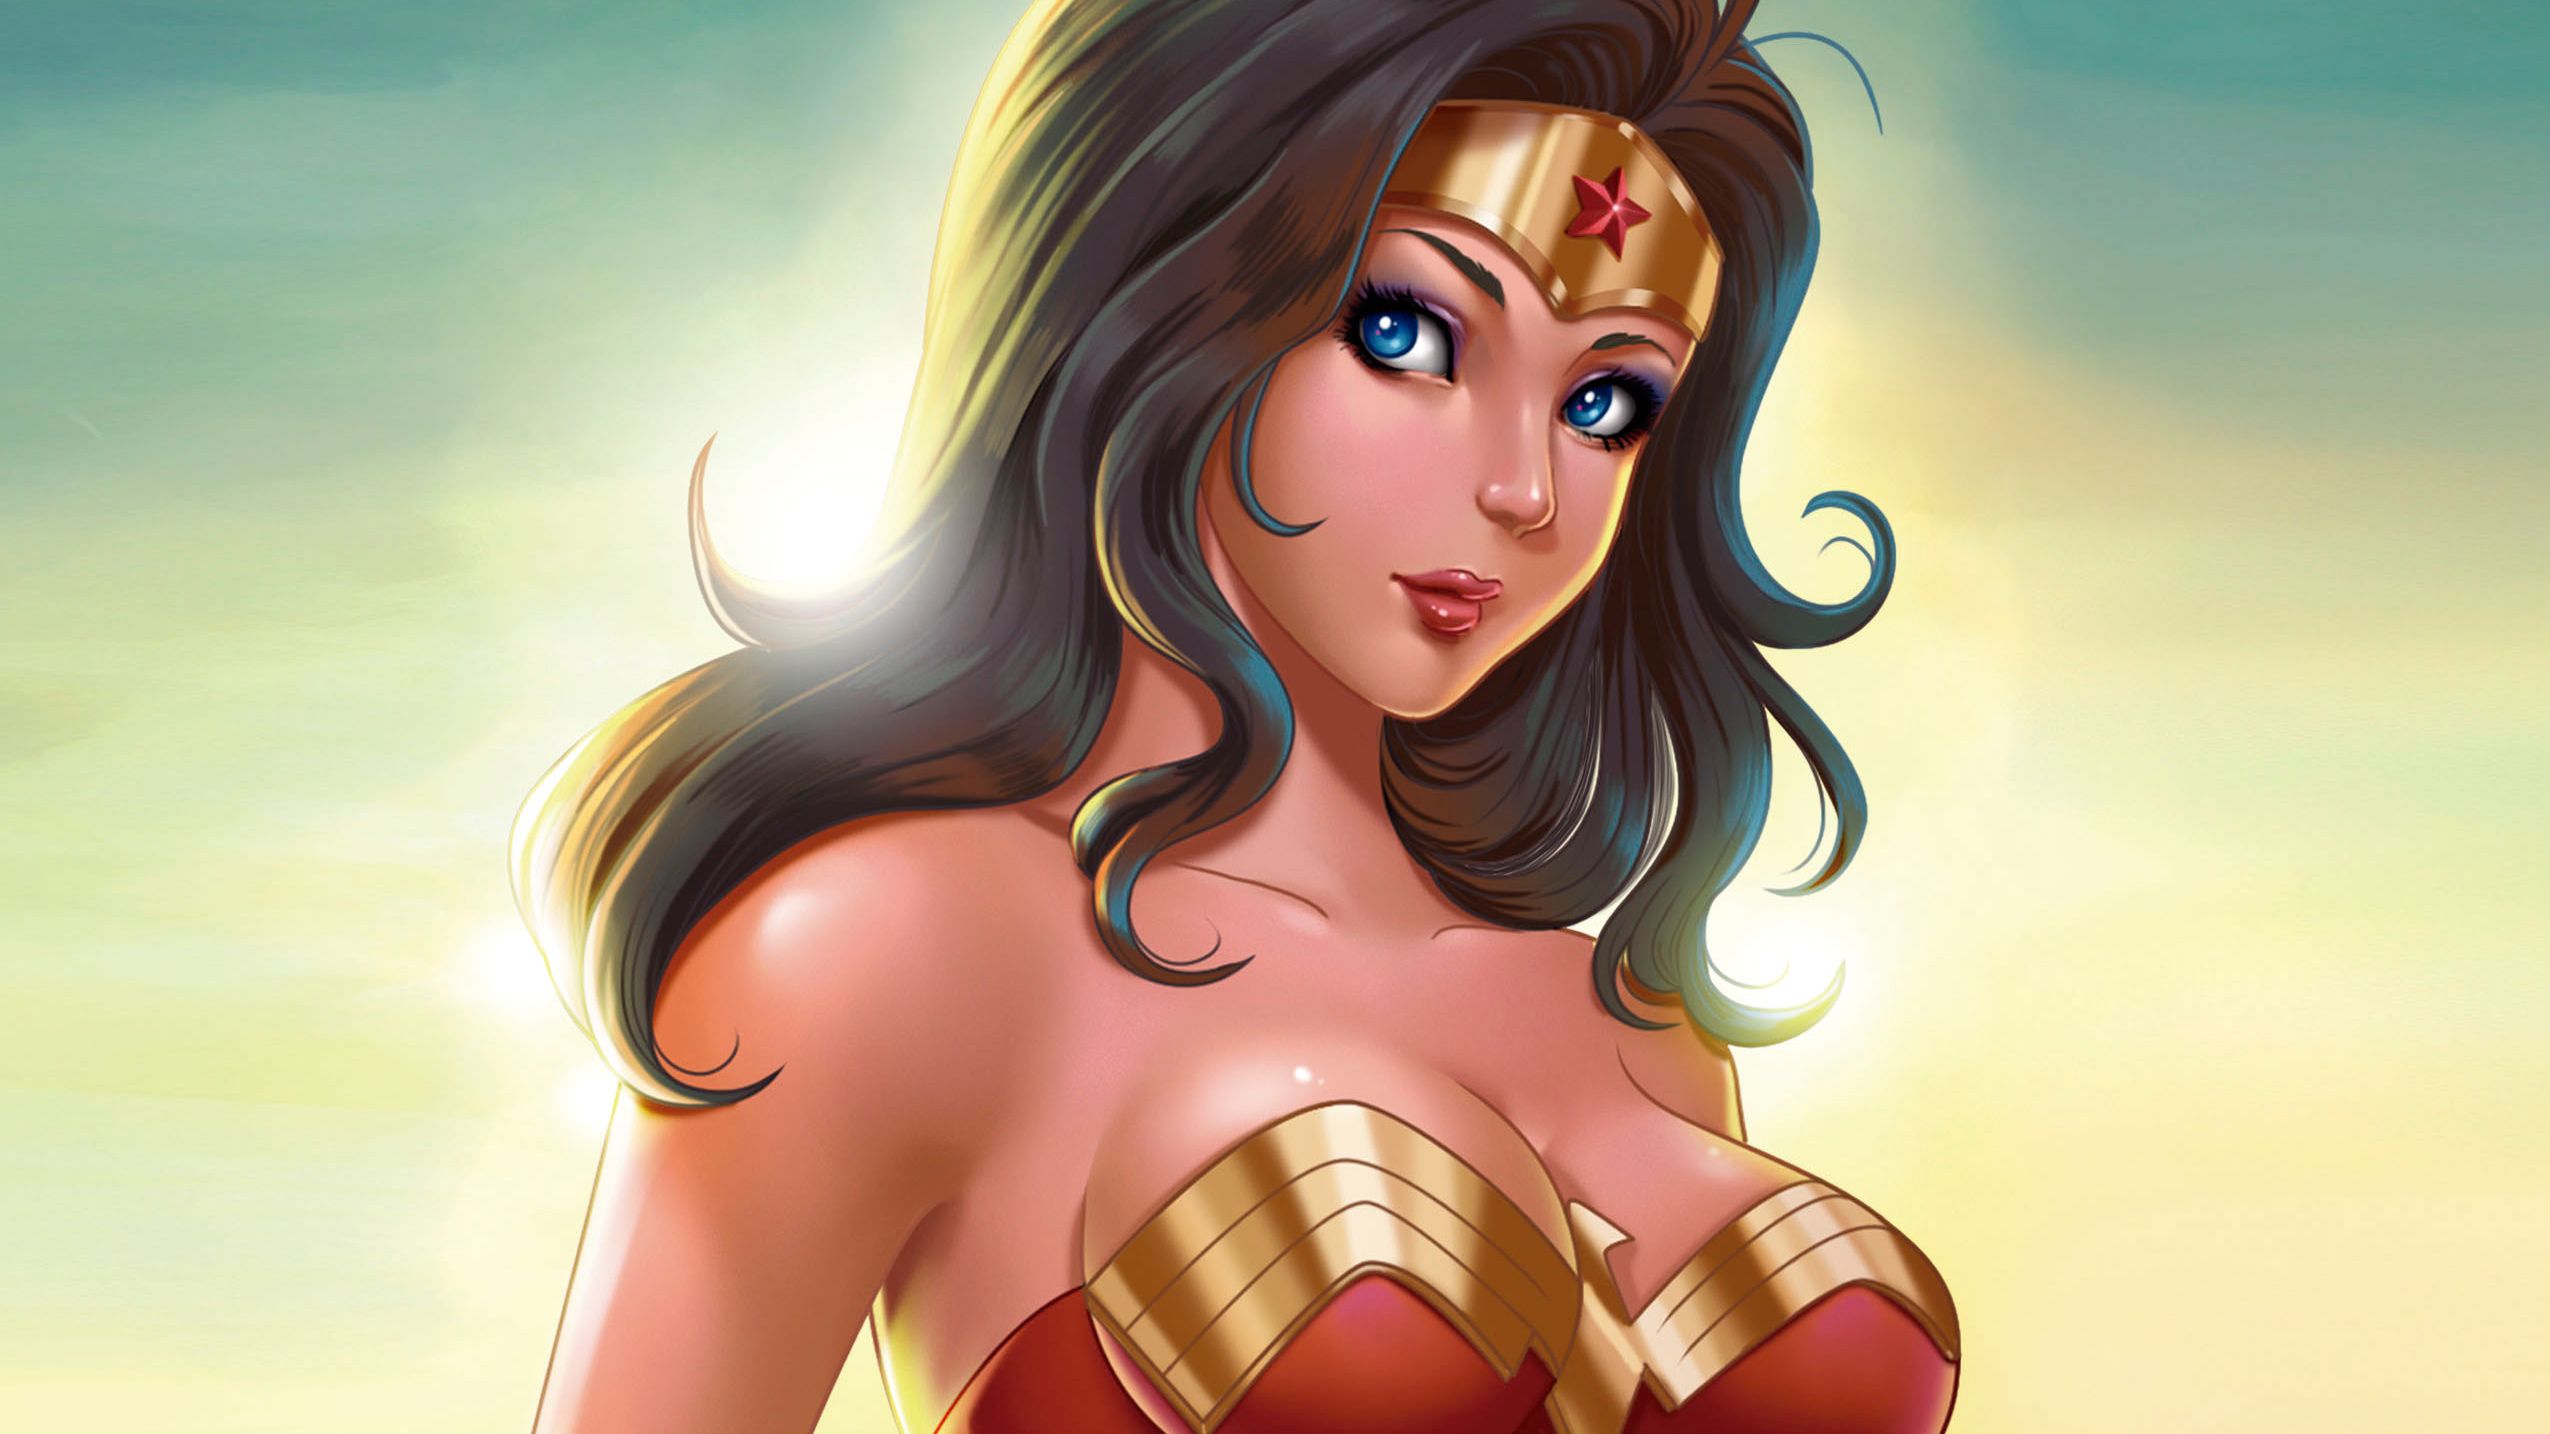 Cute Art Wonder Woman, HD Superheroes, 4k Wallpaper, Image, Background, Photo and Picture